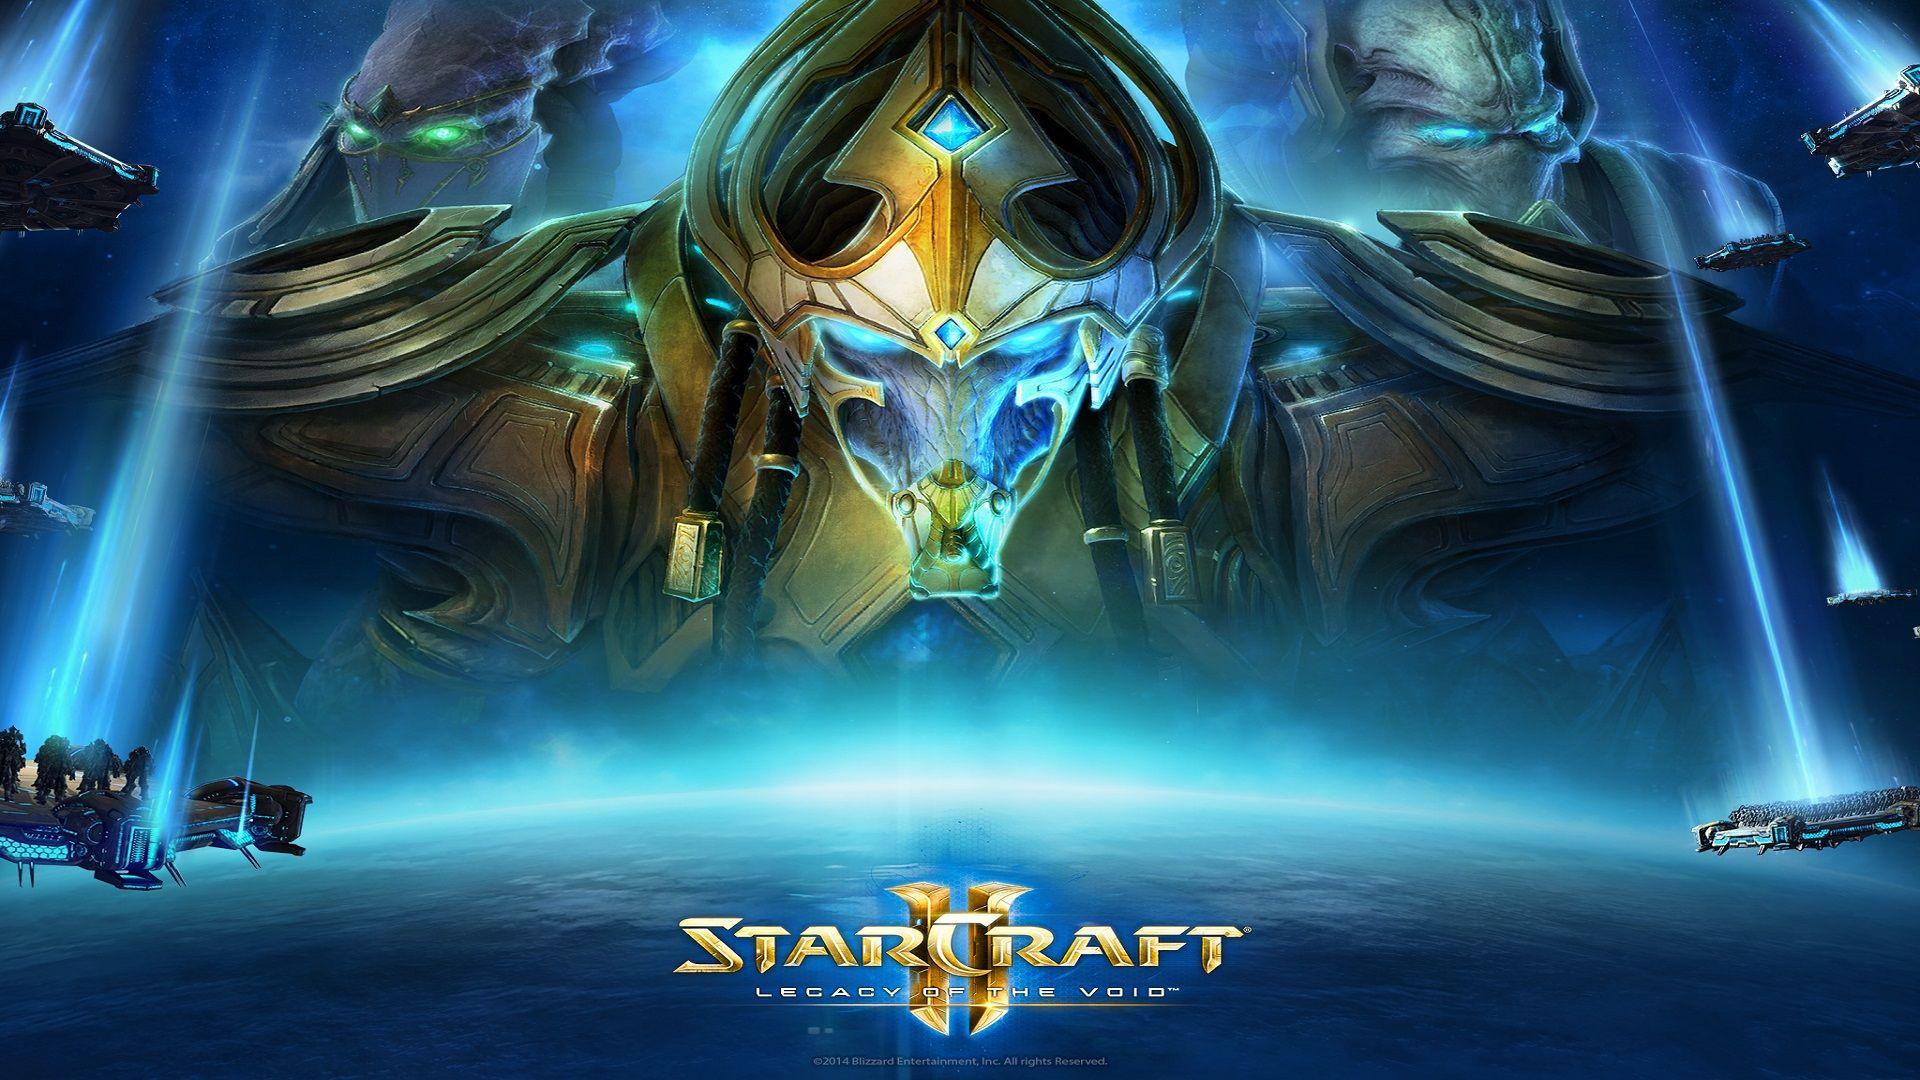 7 Things We Can Look Forward to BlizzCon 2015 on November 6 and 7